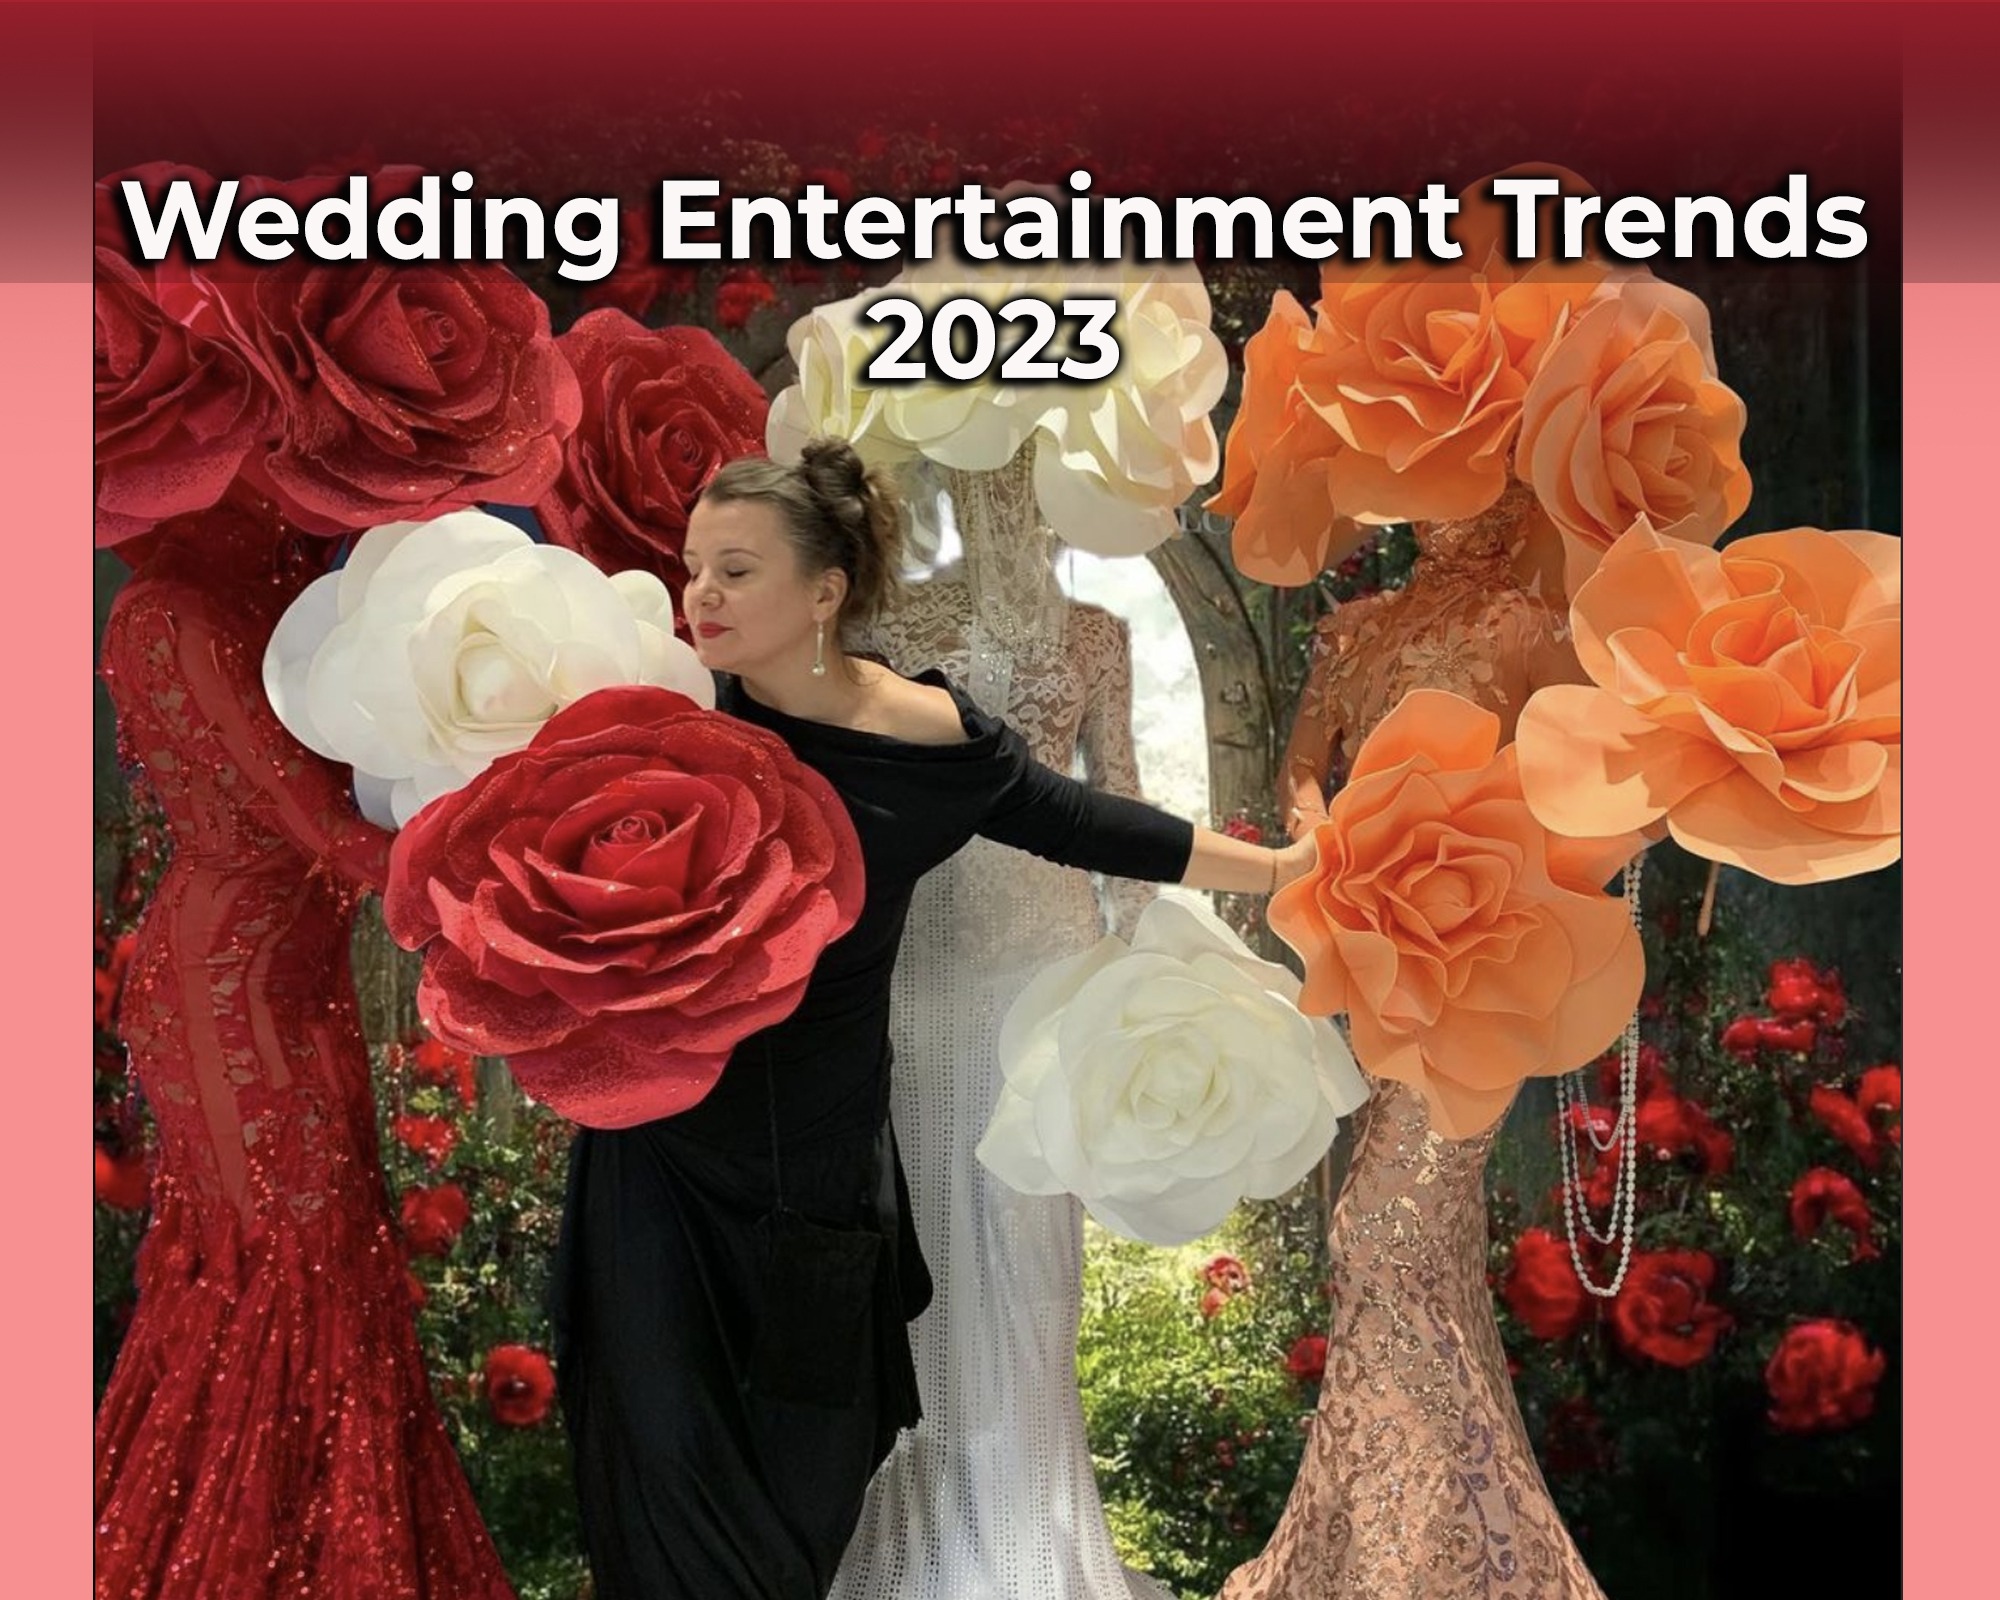 A picture with 3 roses characters/performance, Olga the creator and "Wedding Entertainment Trends 2023”